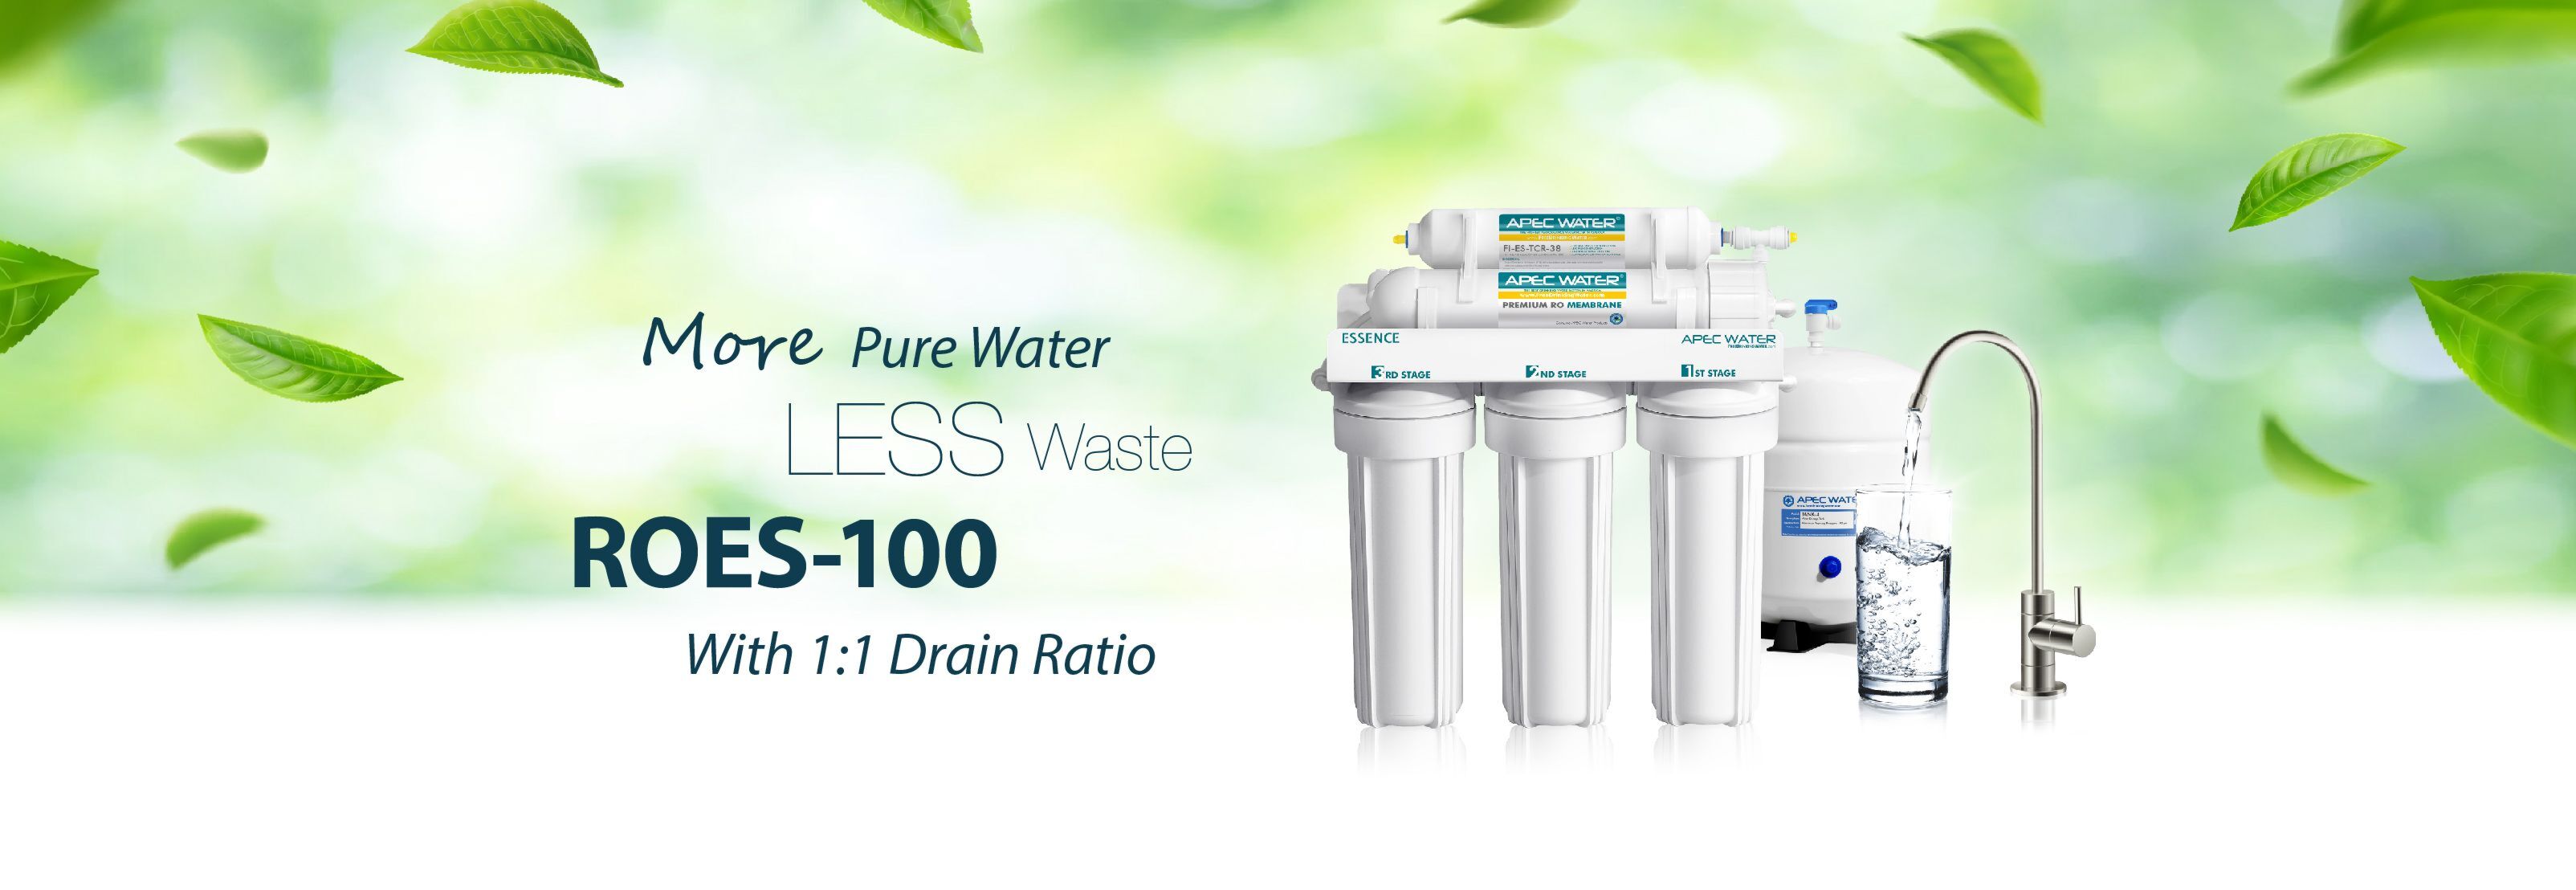 2021 ROES-100 Water Filtration System